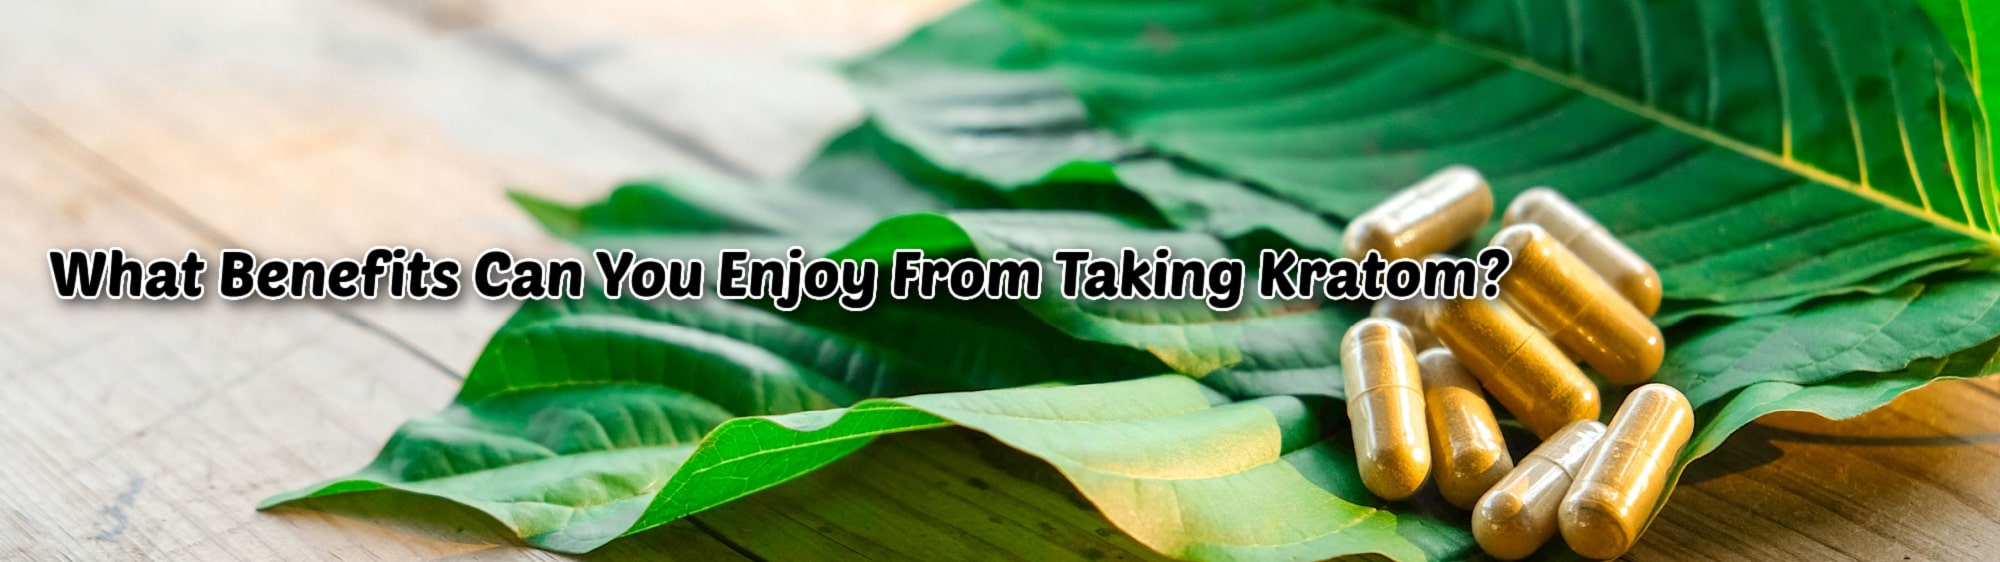 image of what benefits can you enjoy from taking kratom